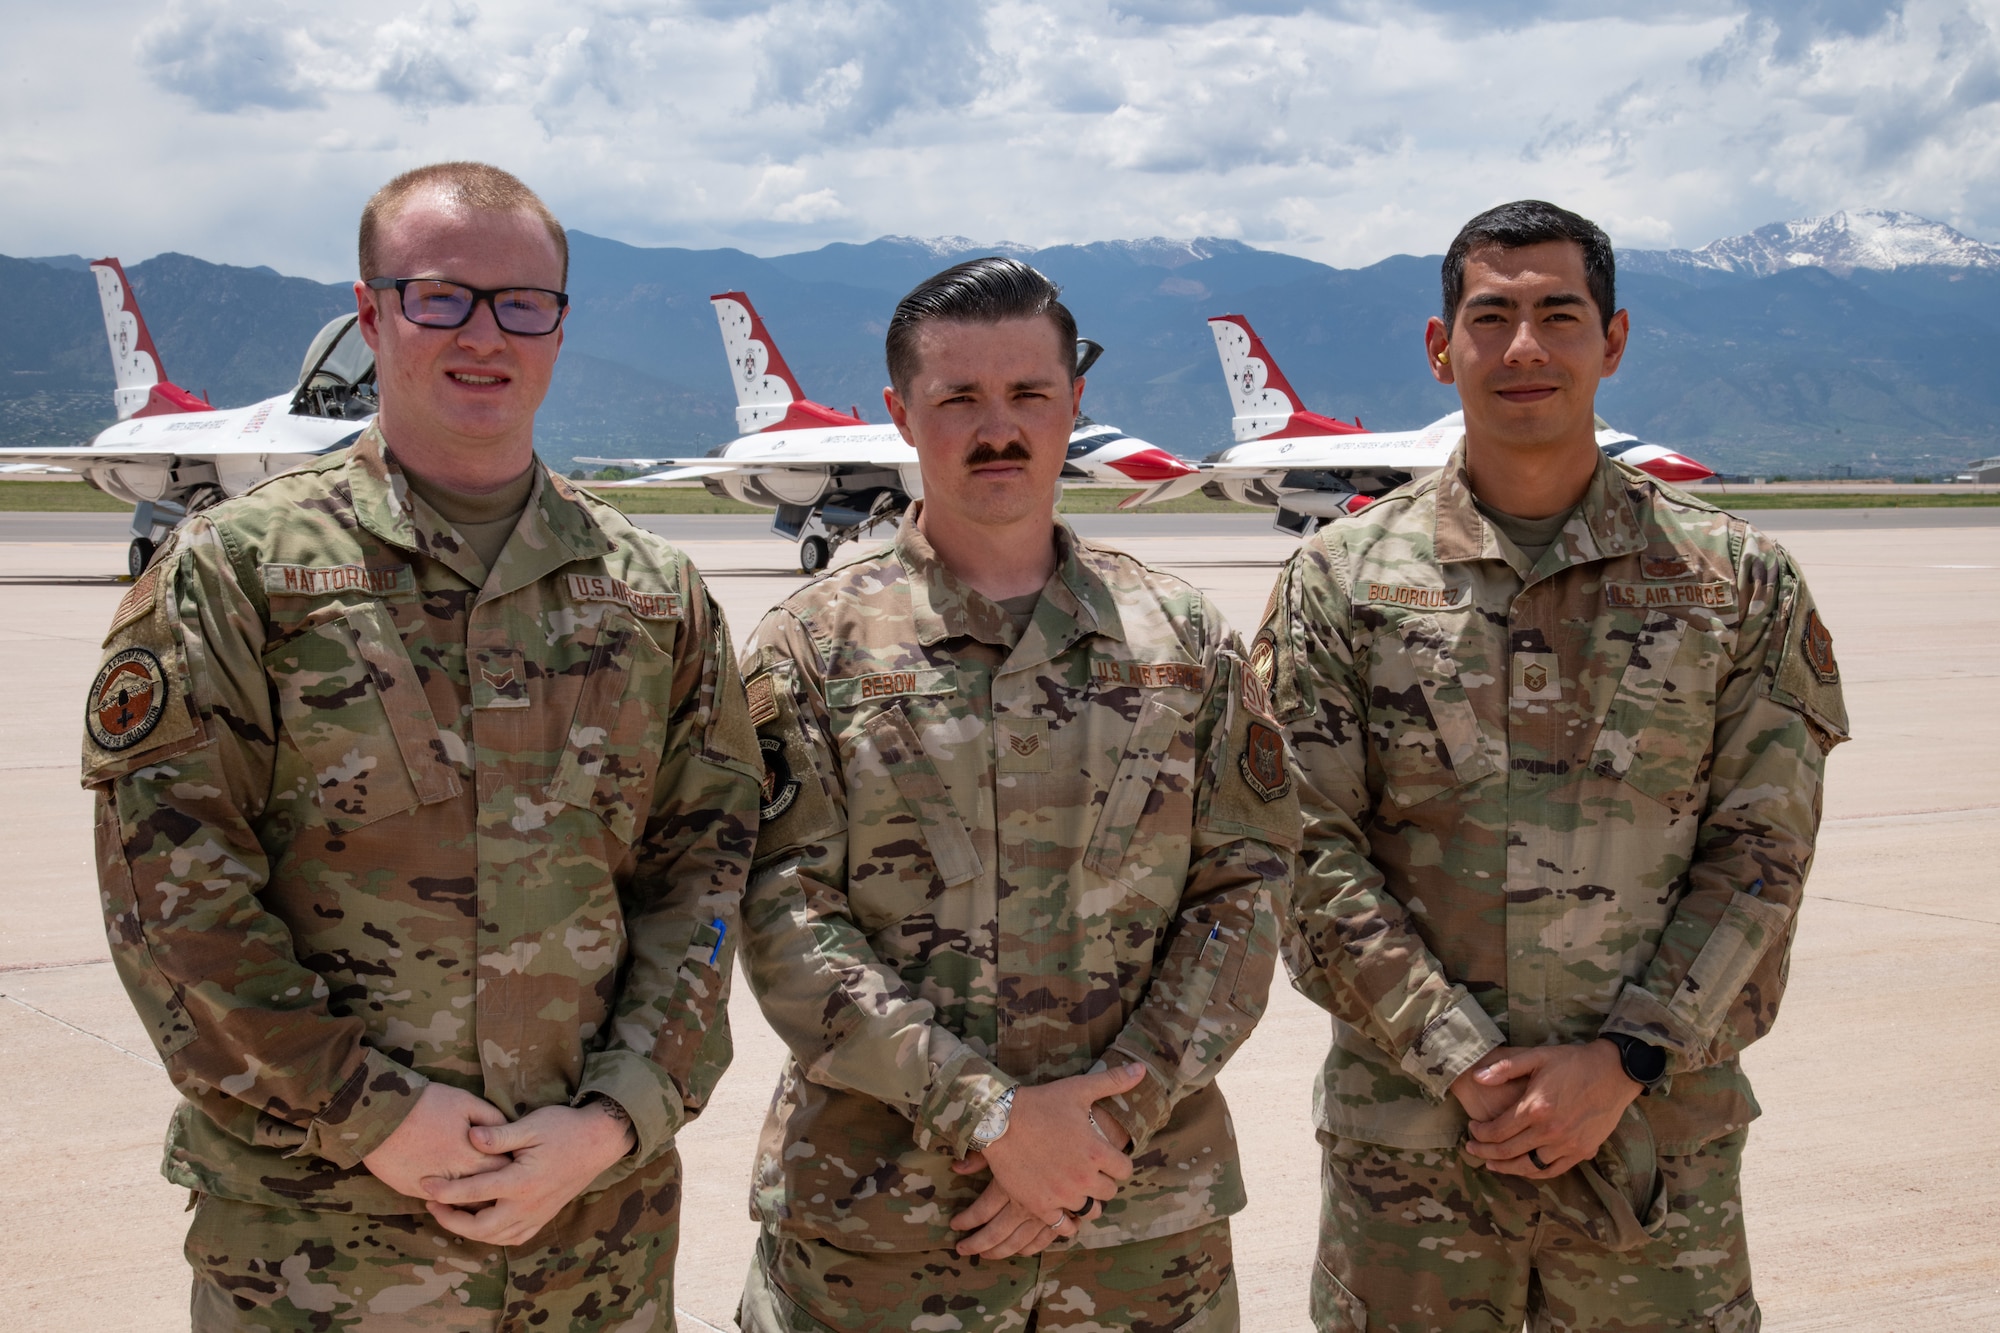 Three military members stand in front of red, white and blue fighter jets.